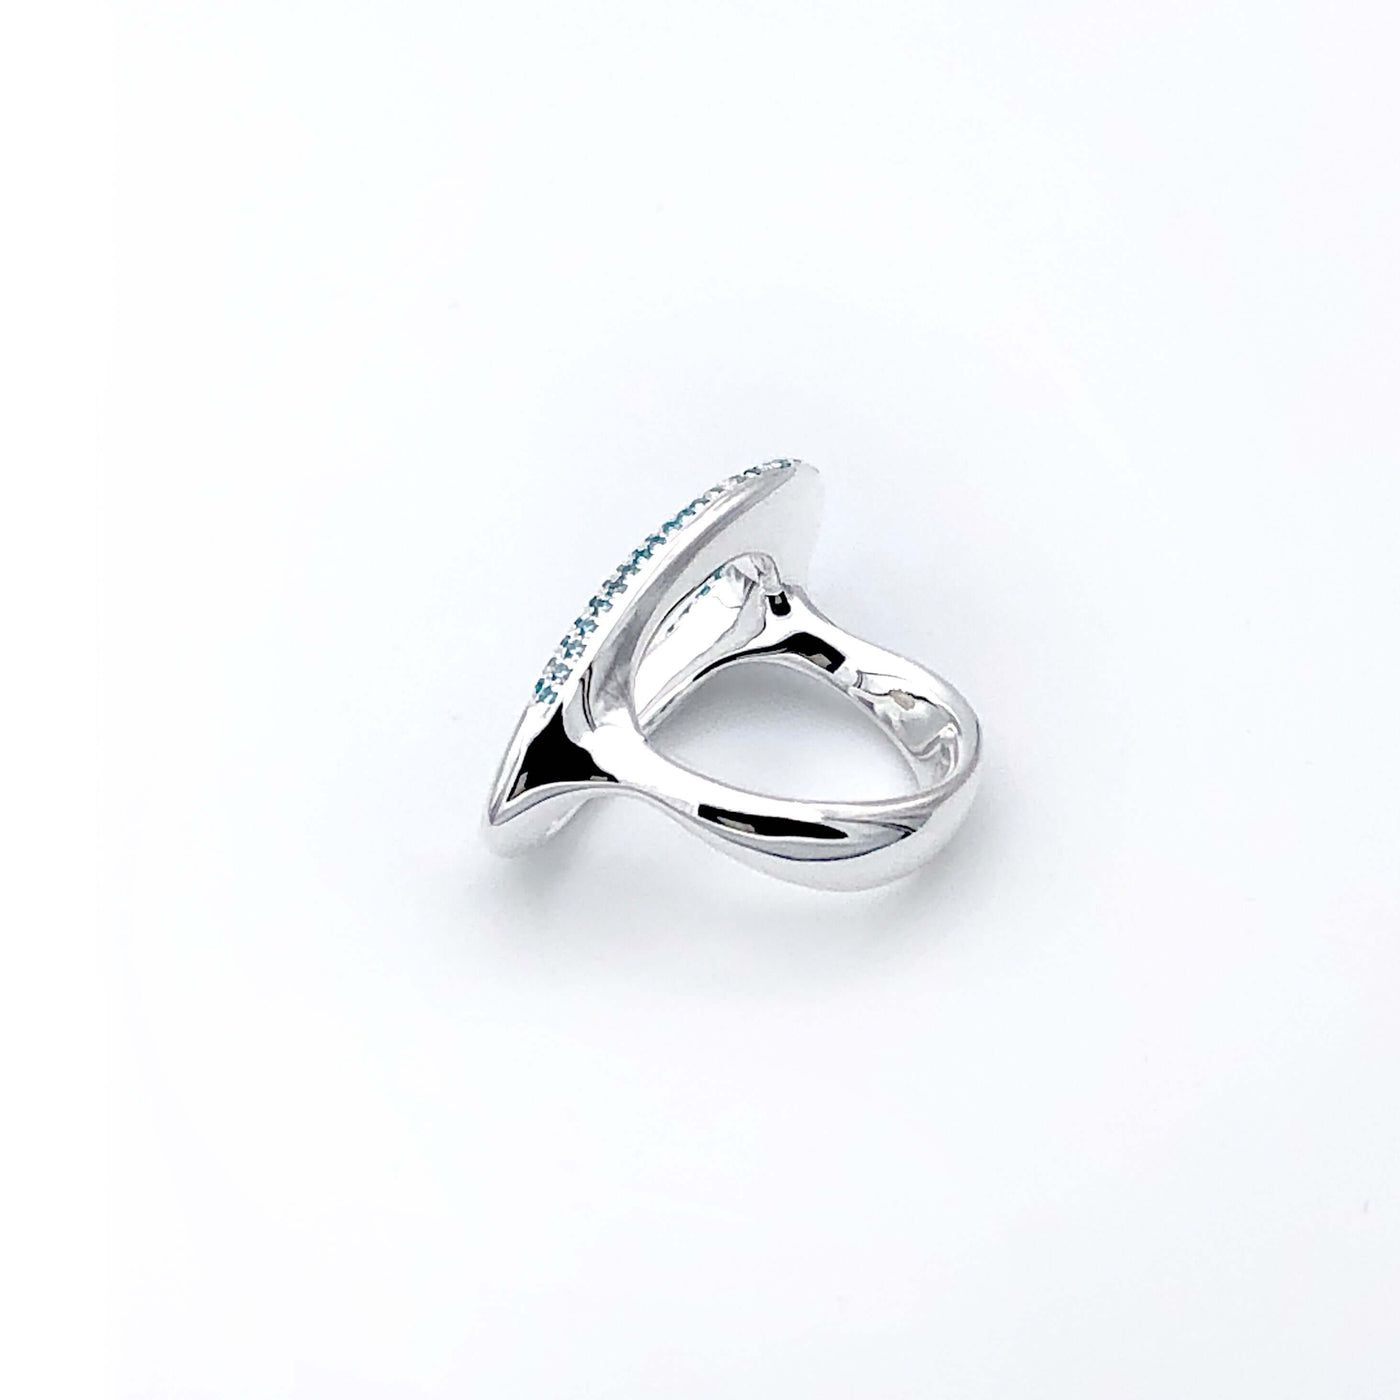 Beau-Bassin-Silver-Ring-with-Cubic-Zirconia-DodoMarket